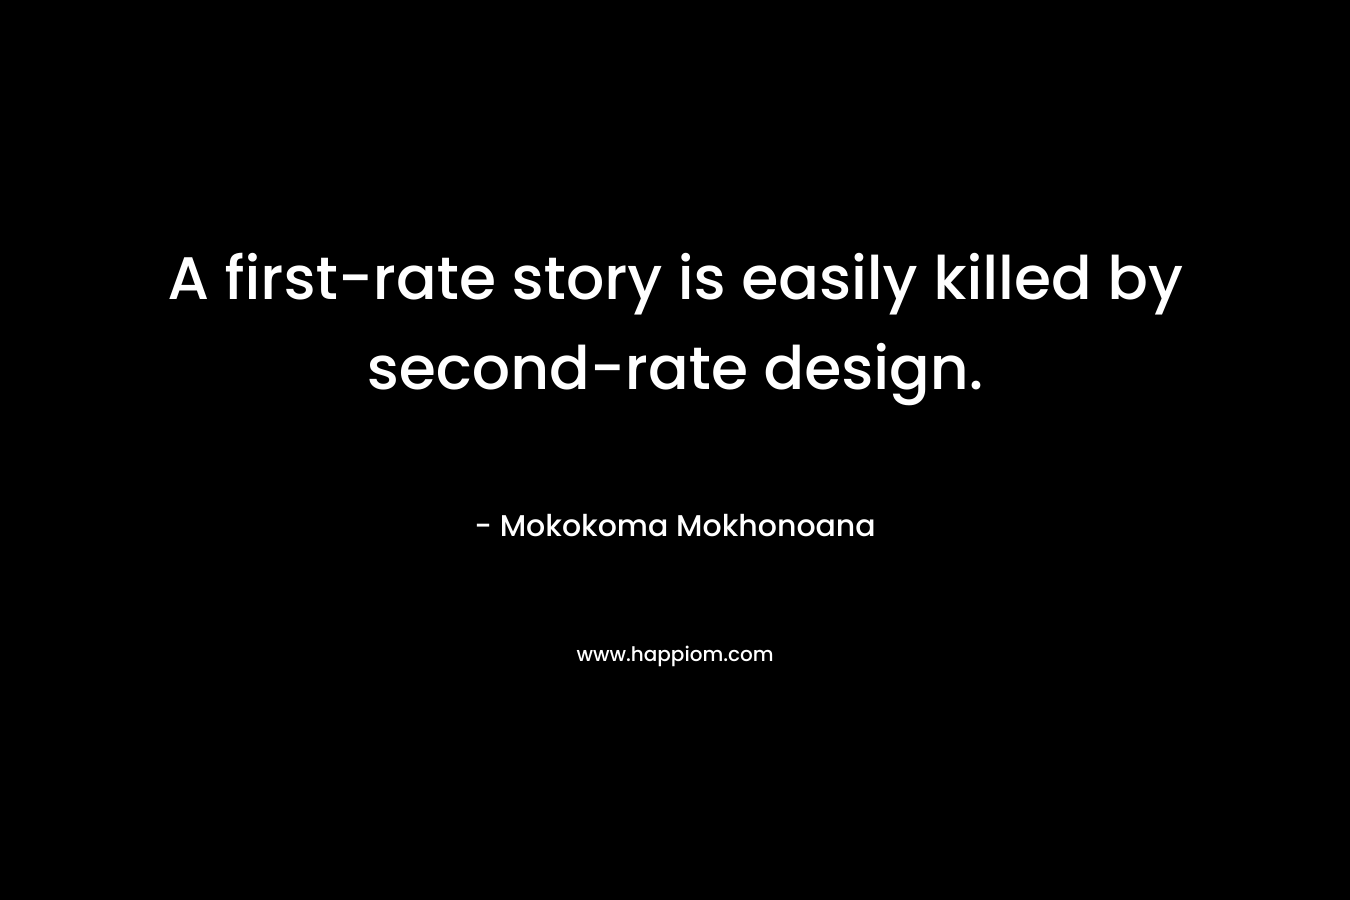 A first-rate story is easily killed by second-rate design. – Mokokoma Mokhonoana